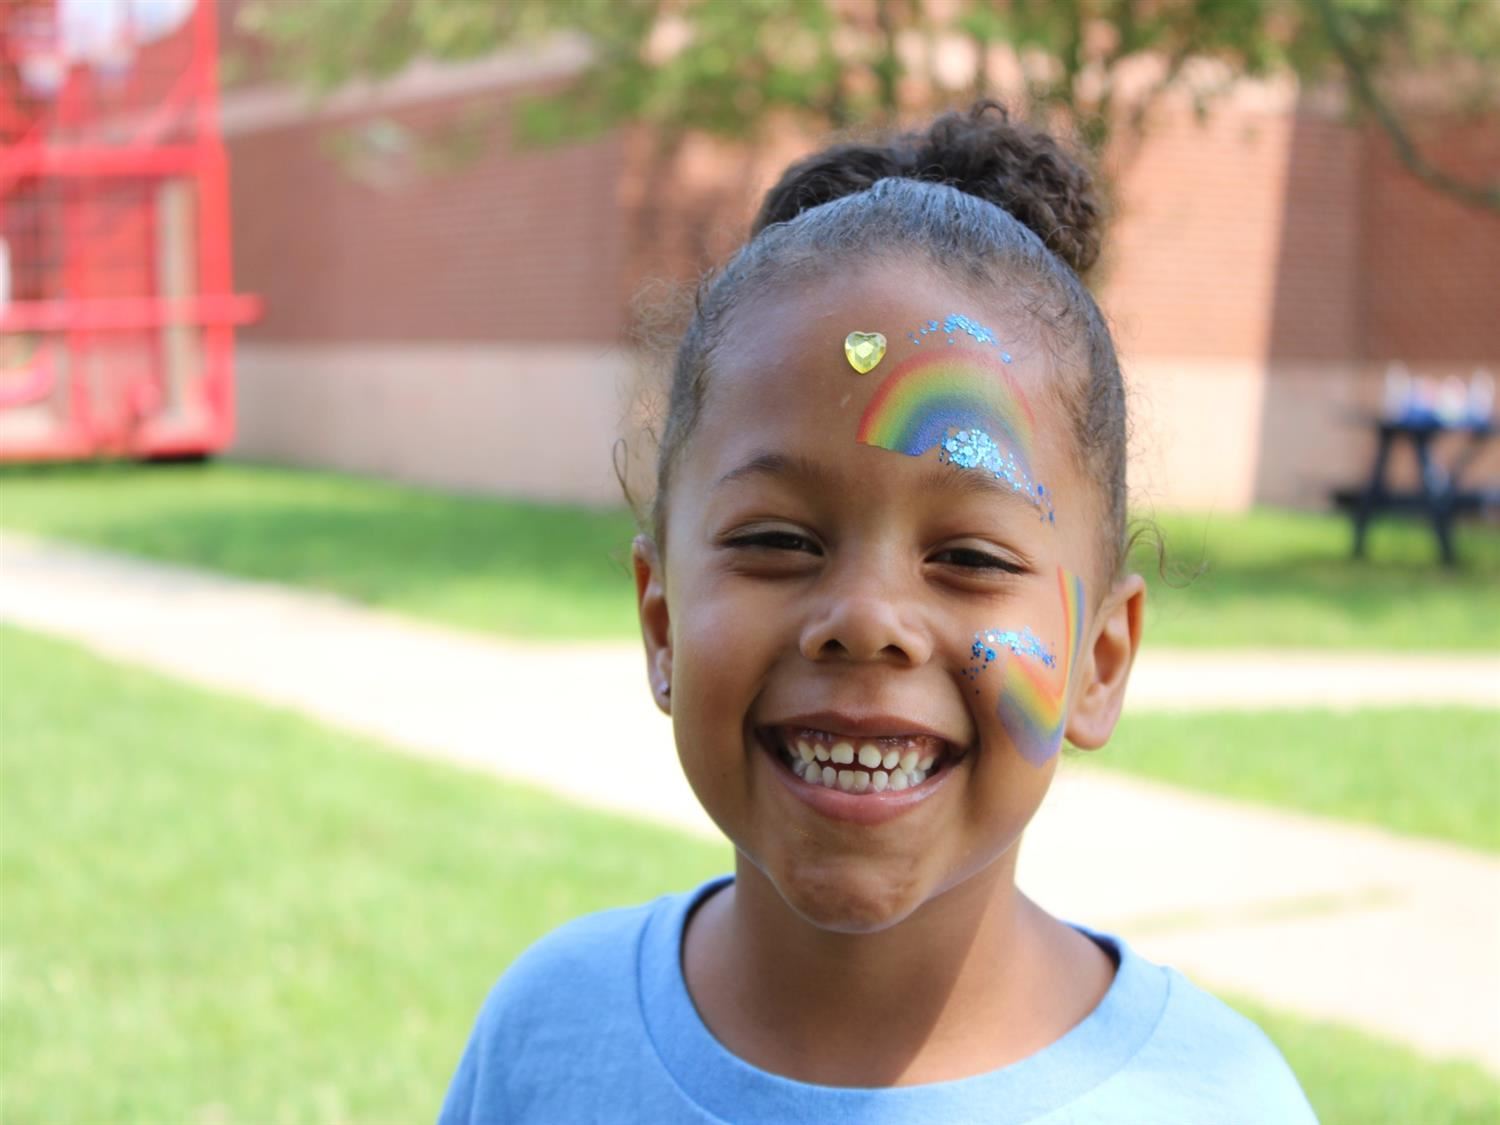 Young girl with rainbows and glitter painted on her smiling face.